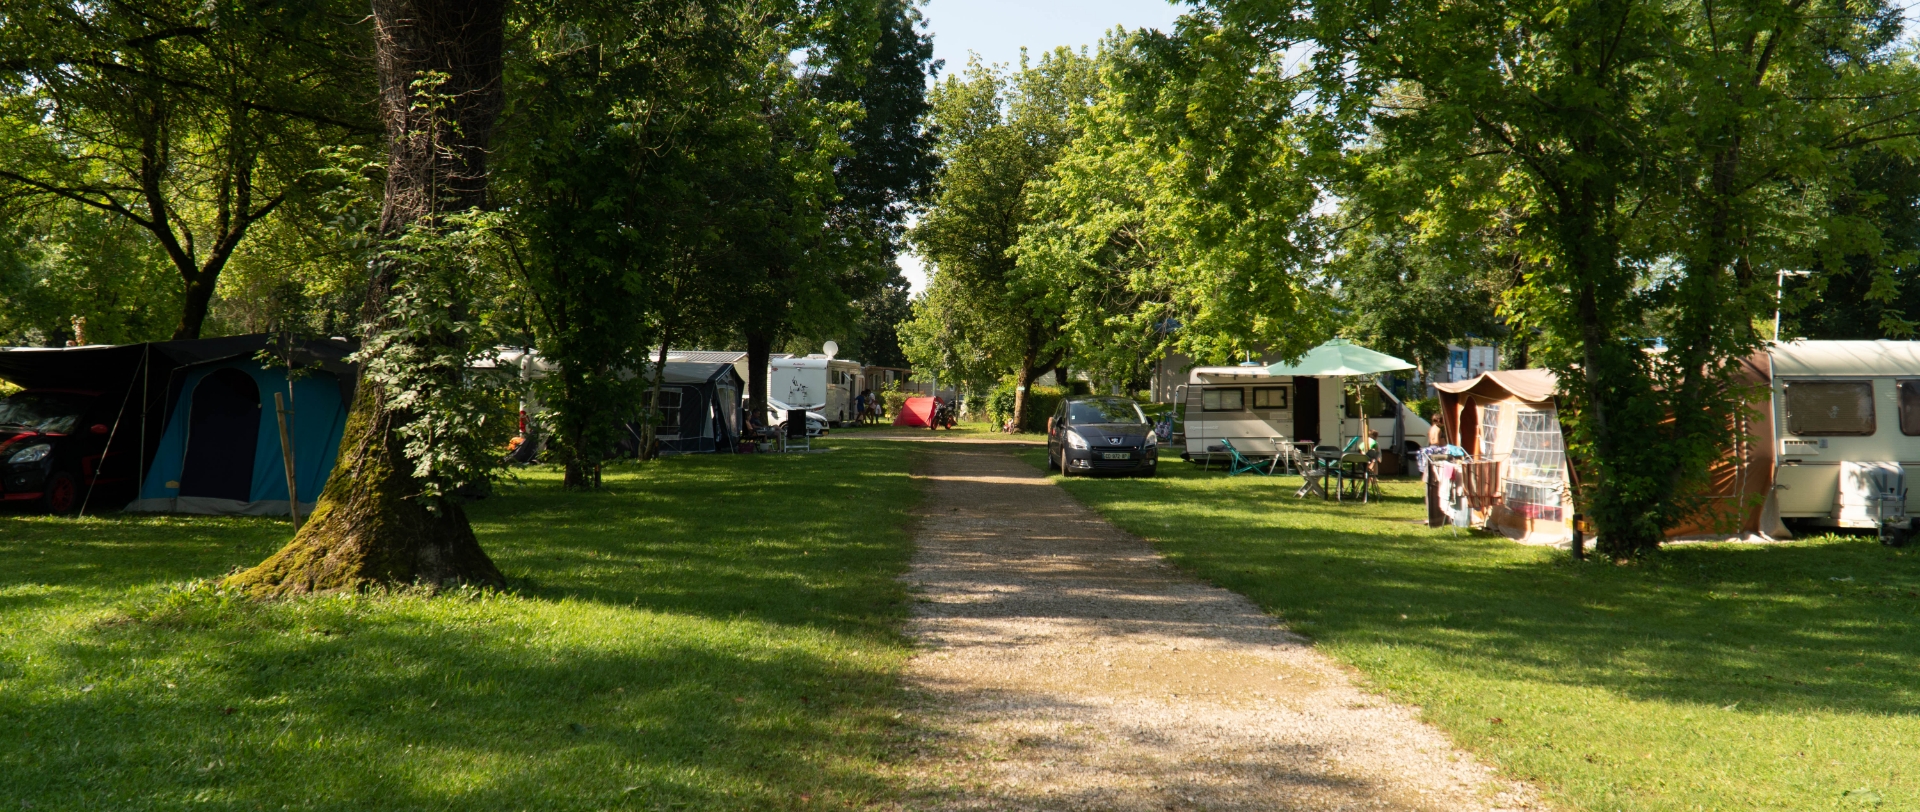 Overview of the campsite pitches at Les Bords de Loue campsite in Jura for tents, caravans and campervans